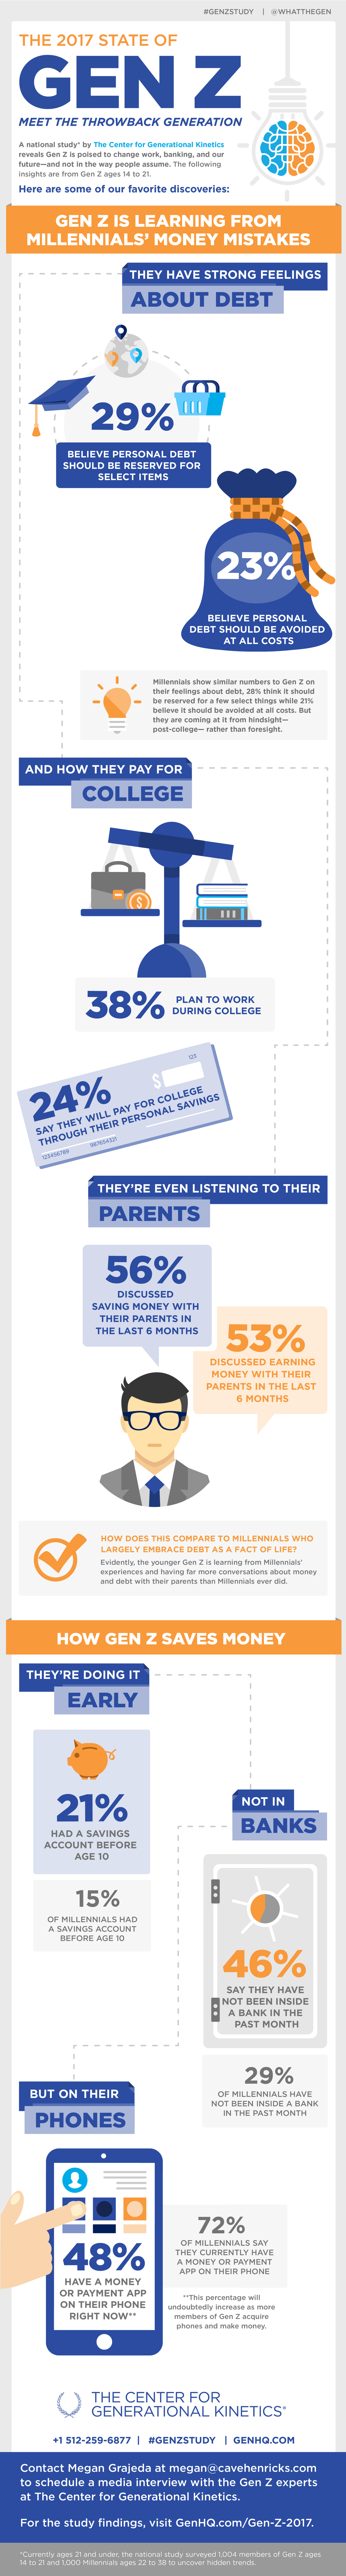 Infographic-Gen-Z-Is-Learning-from-Millennials-Money-Mistakes